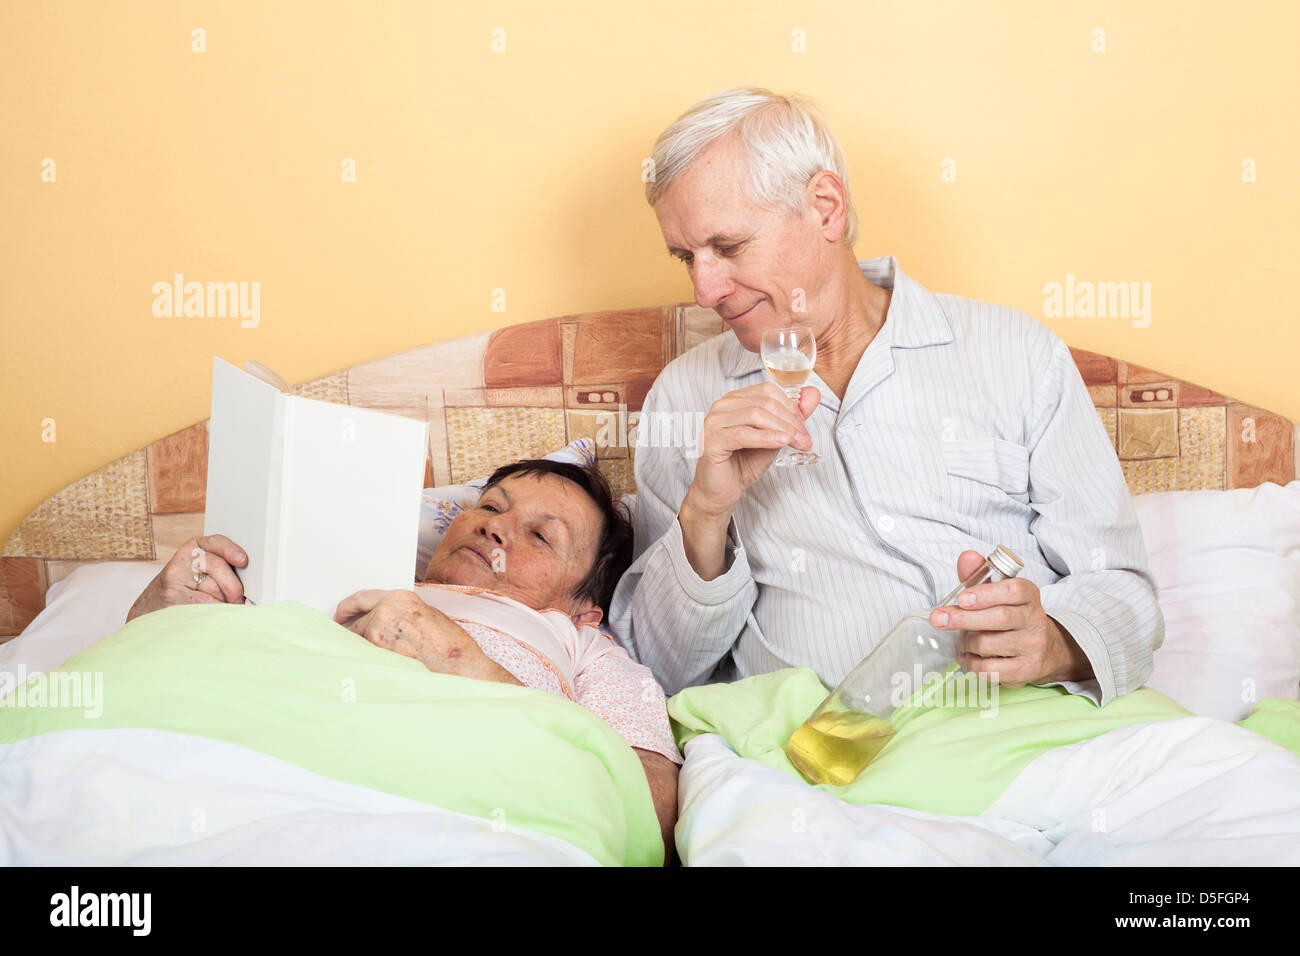 Funny senior man drinking alcohol and woman reading book in bed Banque D'Images